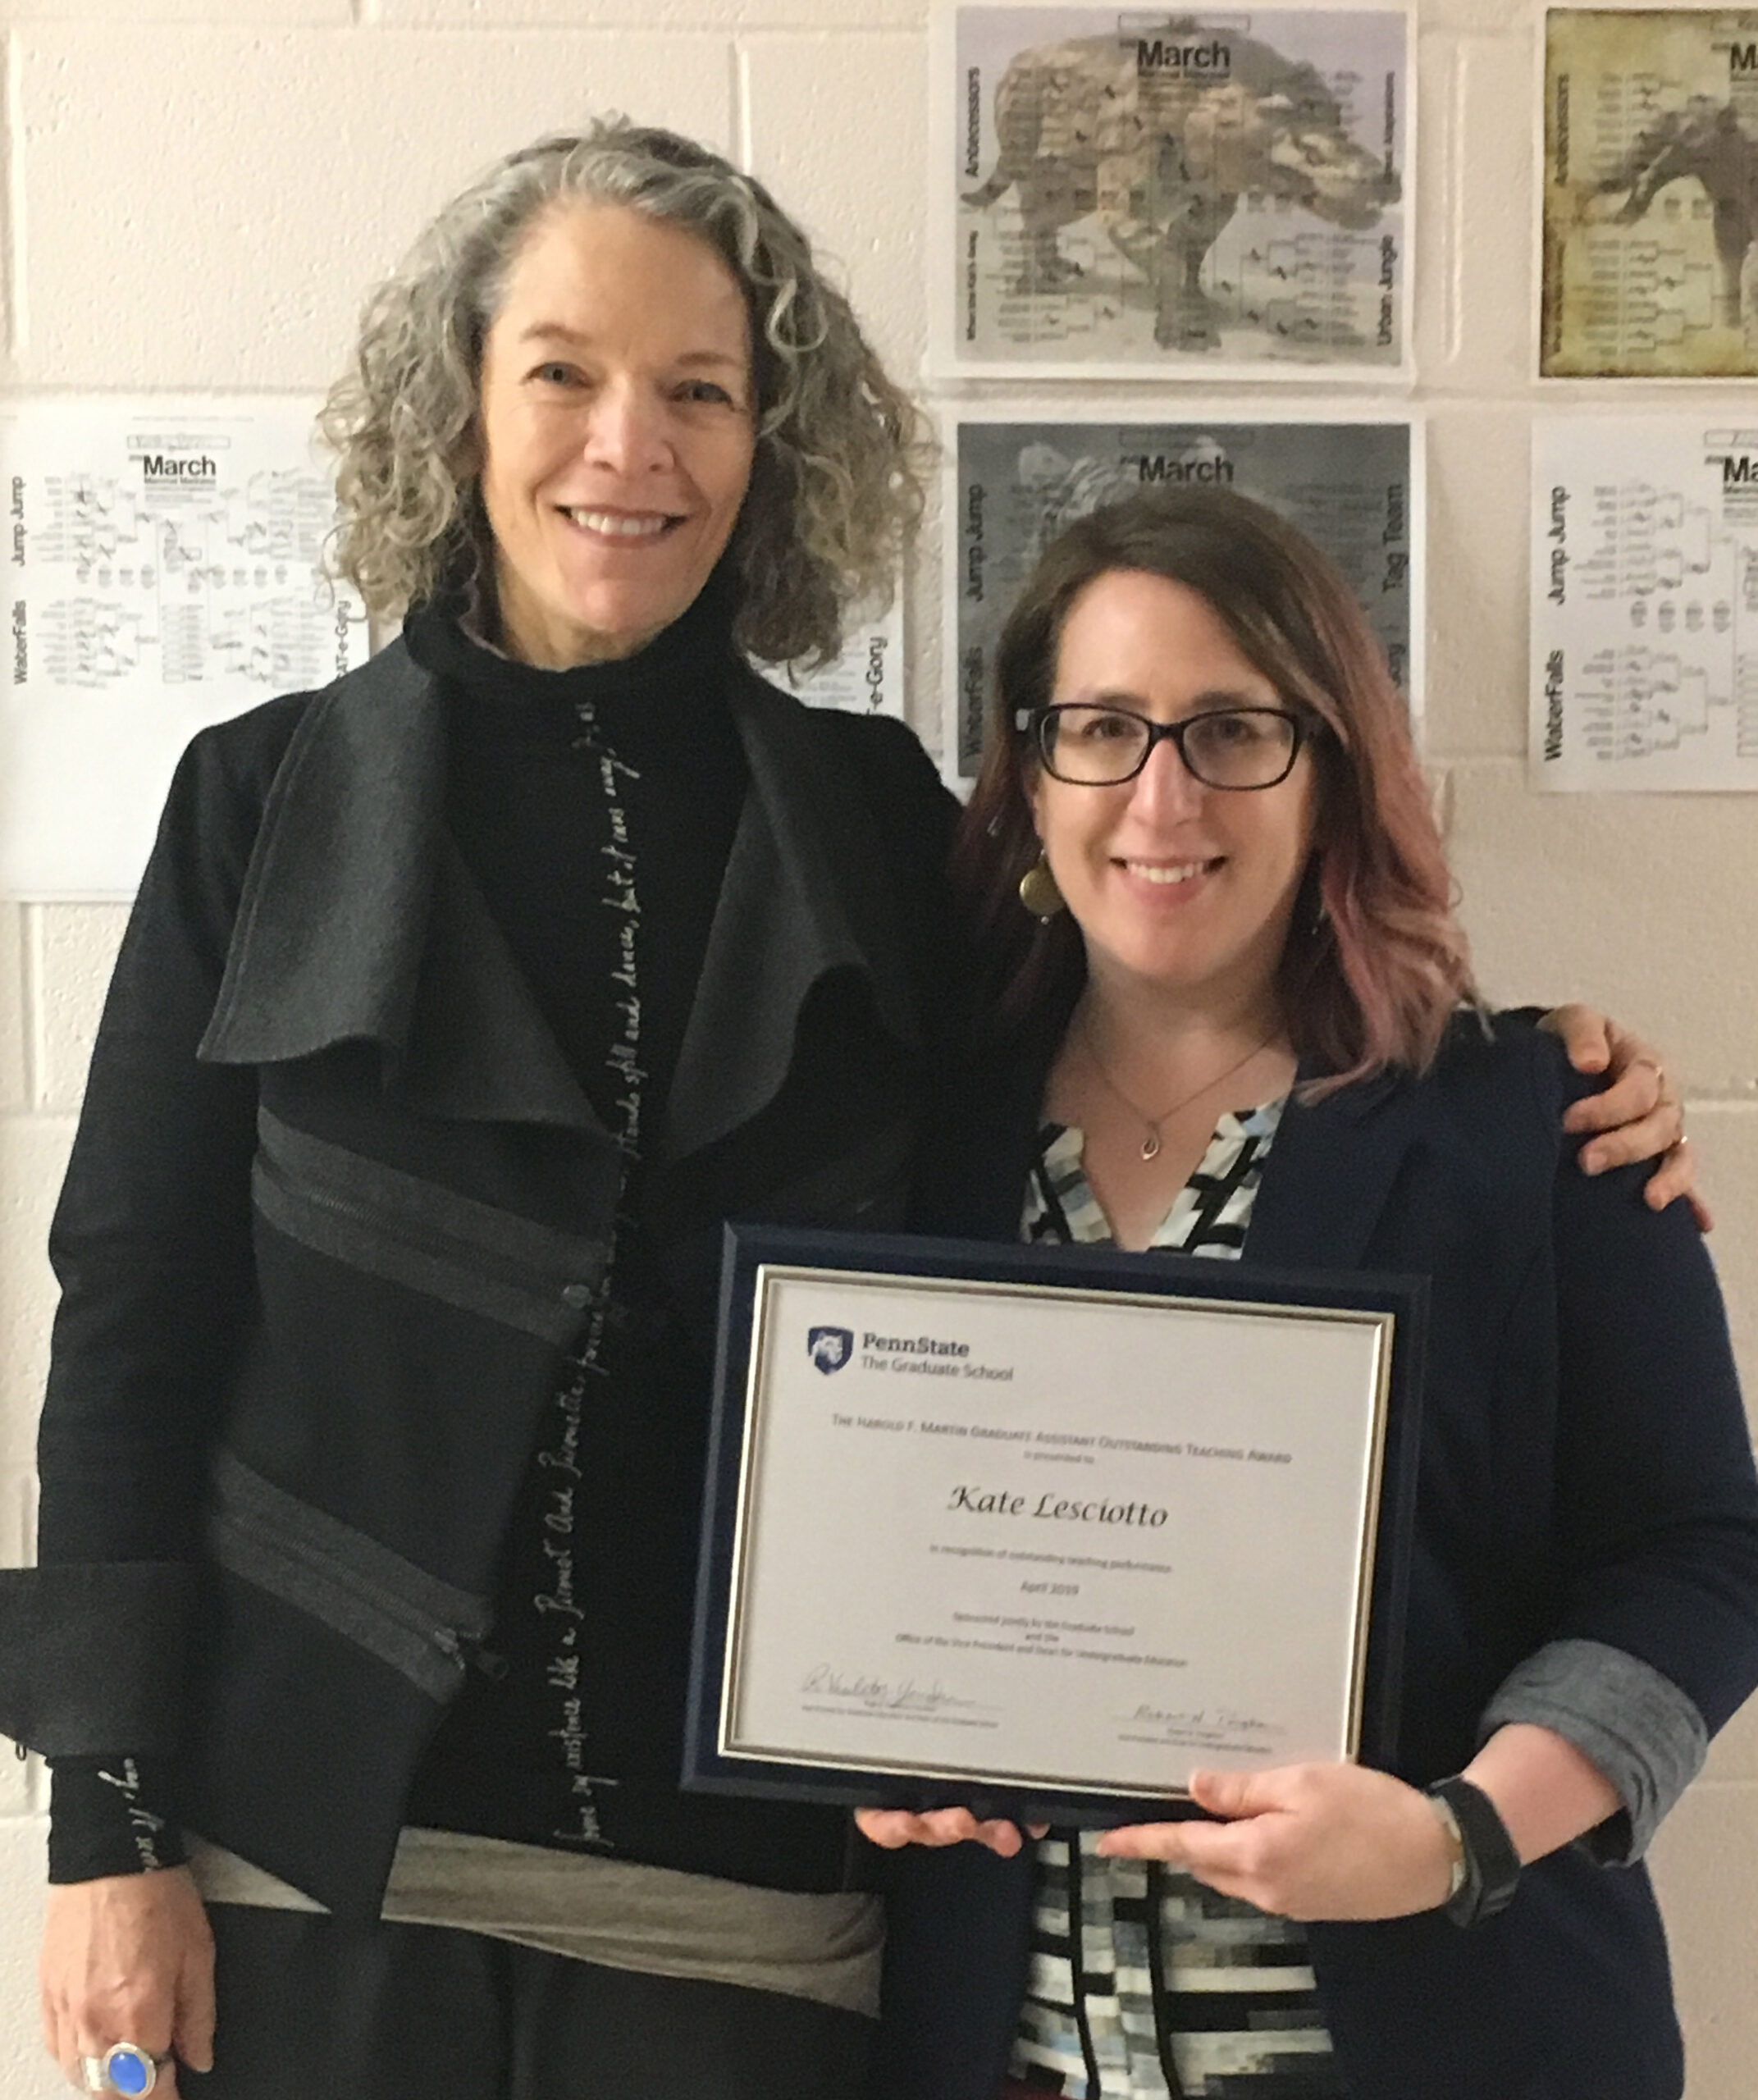 Graduate Student Kate Lesciotto receives the Harold F. Martin Graduate Assistant Outstanding Teaching Award